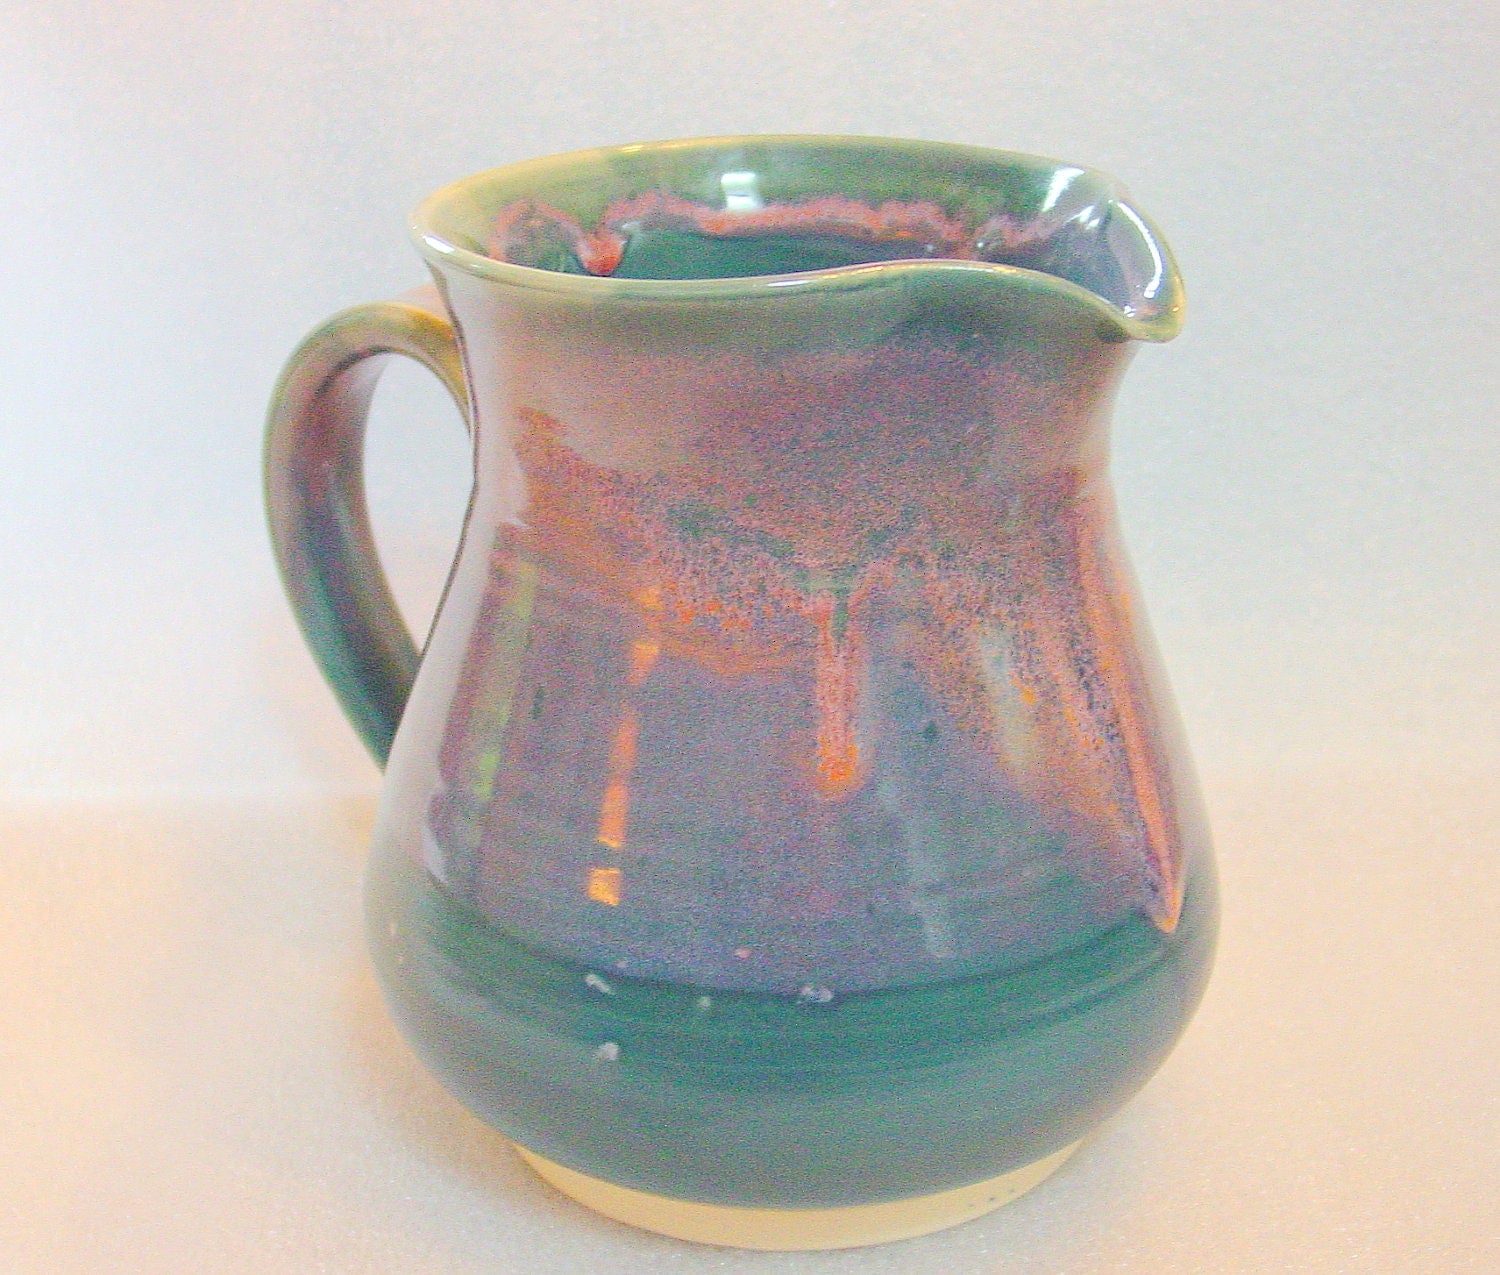 Wheel Thrown Pottery Pitcher in Teal and Pink